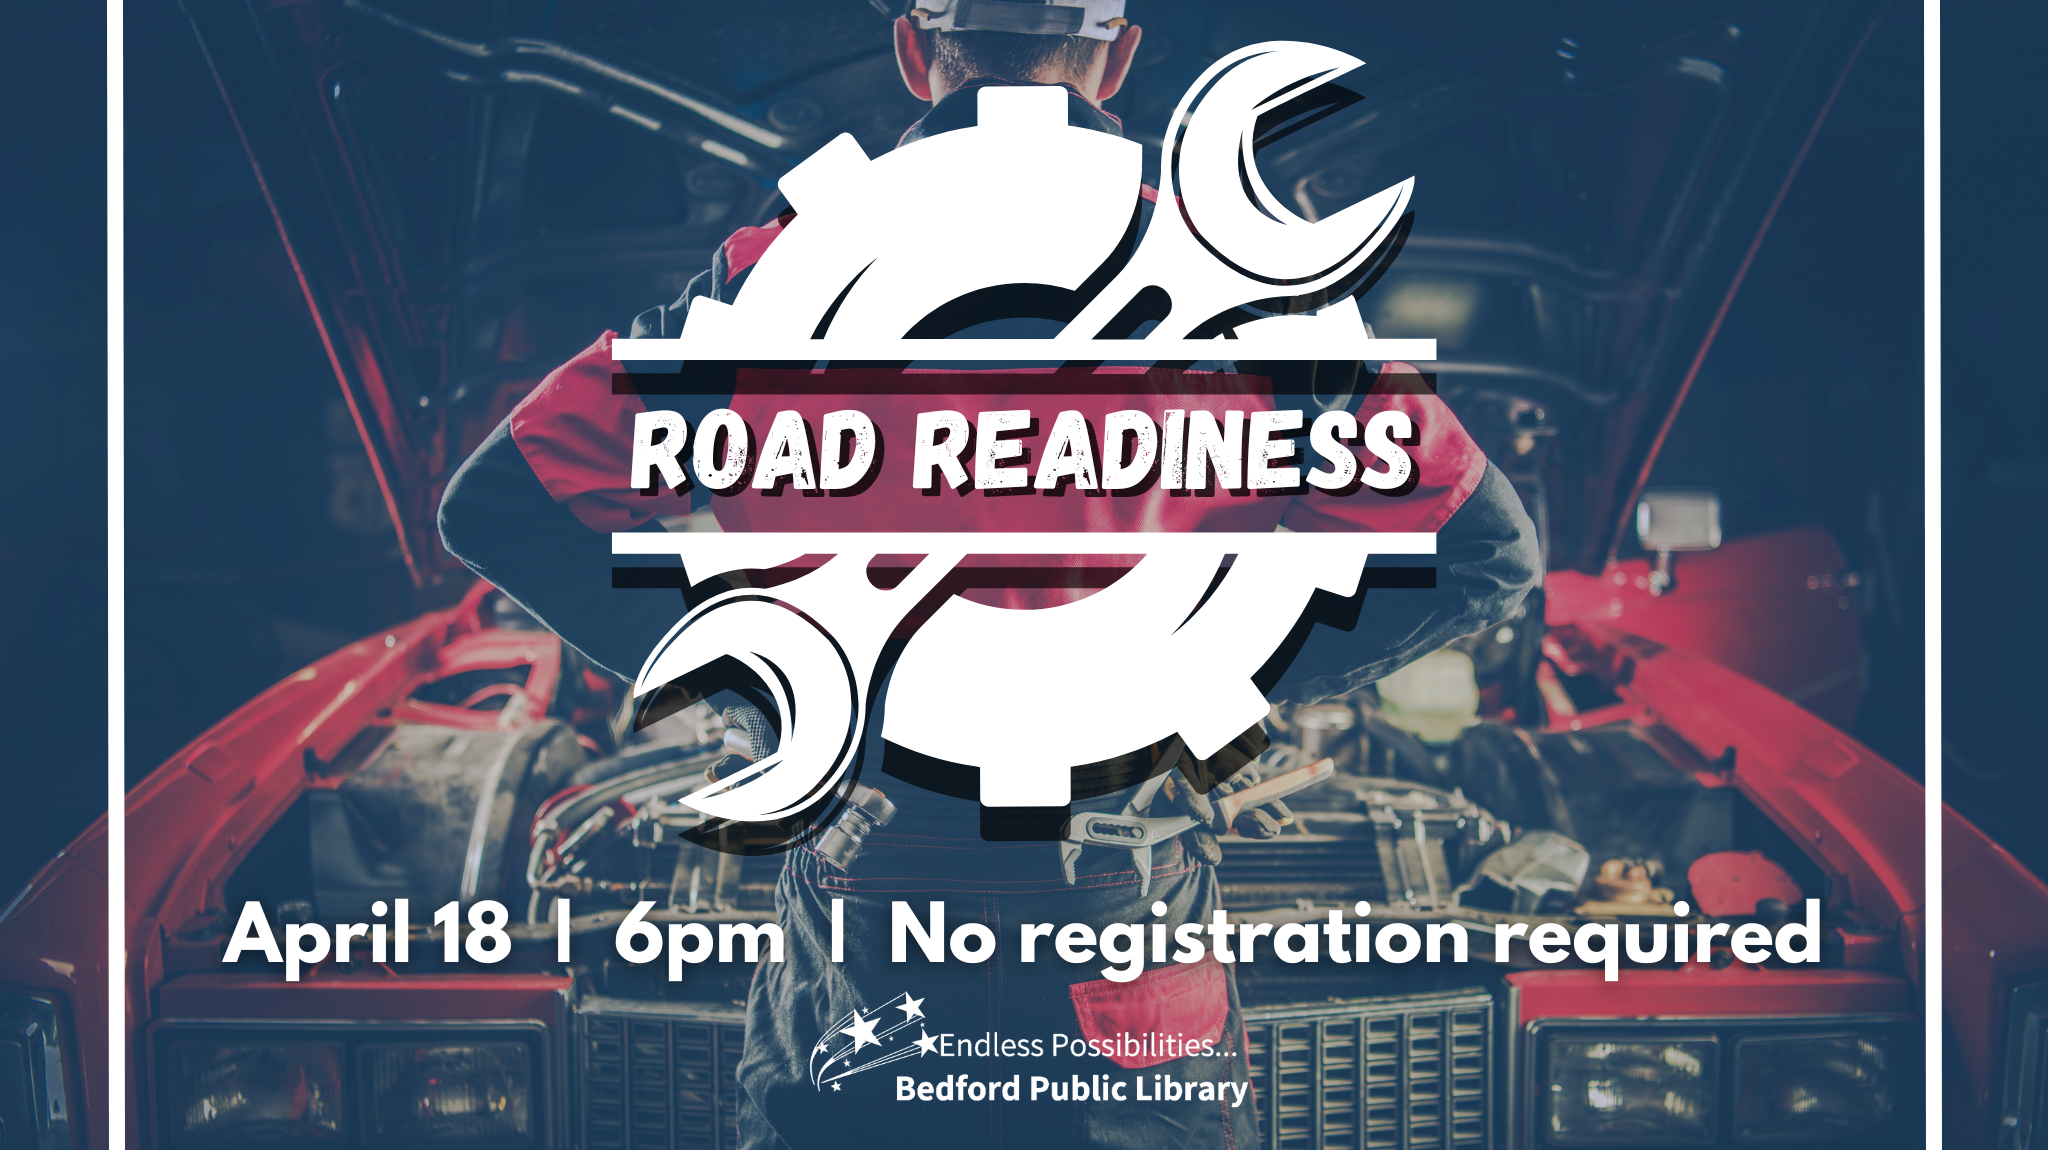 Road Readiness on April 18 at 6pm. No registration required.